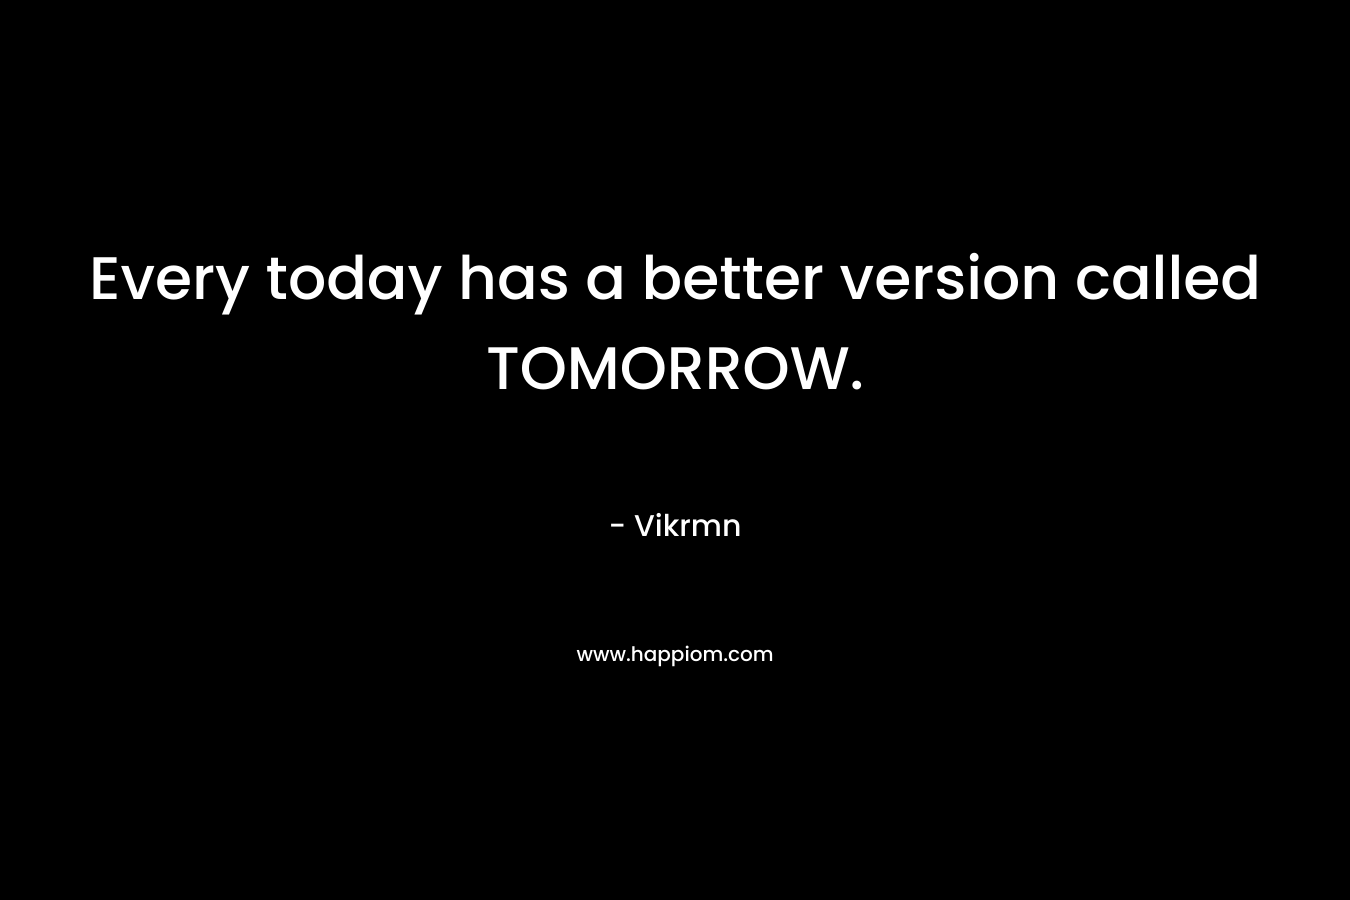 Every today has a better version called TOMORROW.